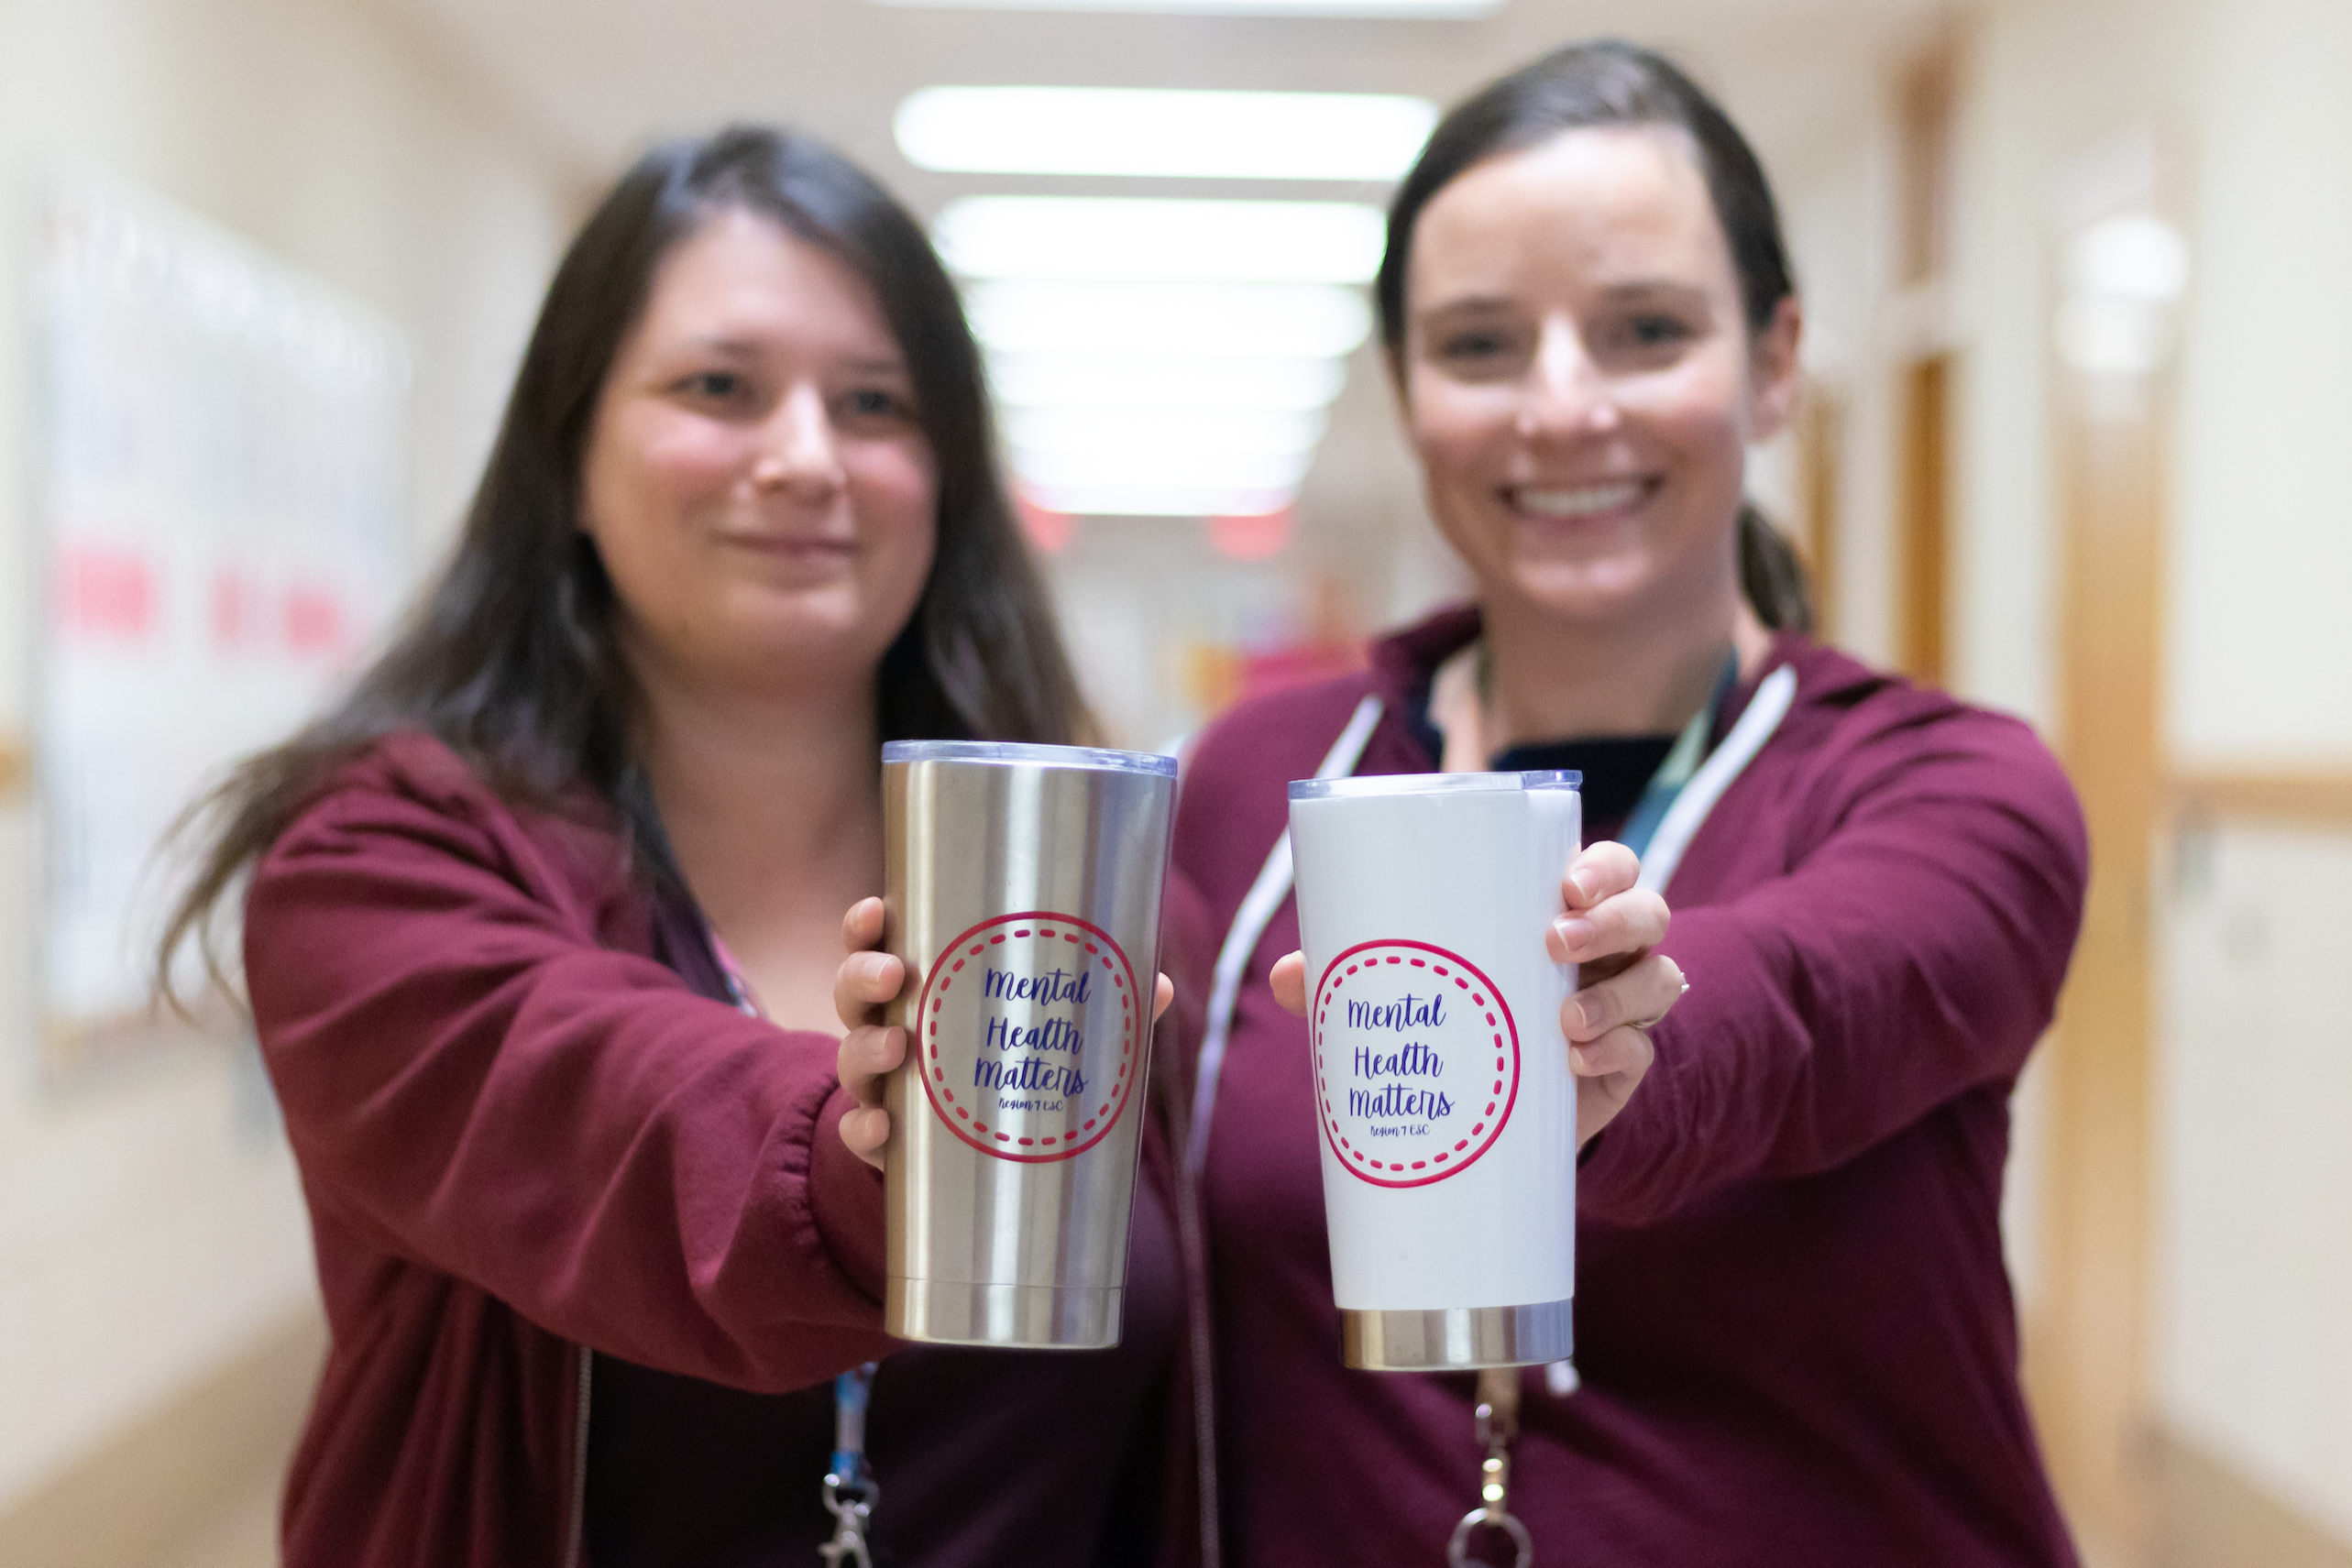 school counselor and mental health counselor holding coffe cups tumblers that say "mental health matters"